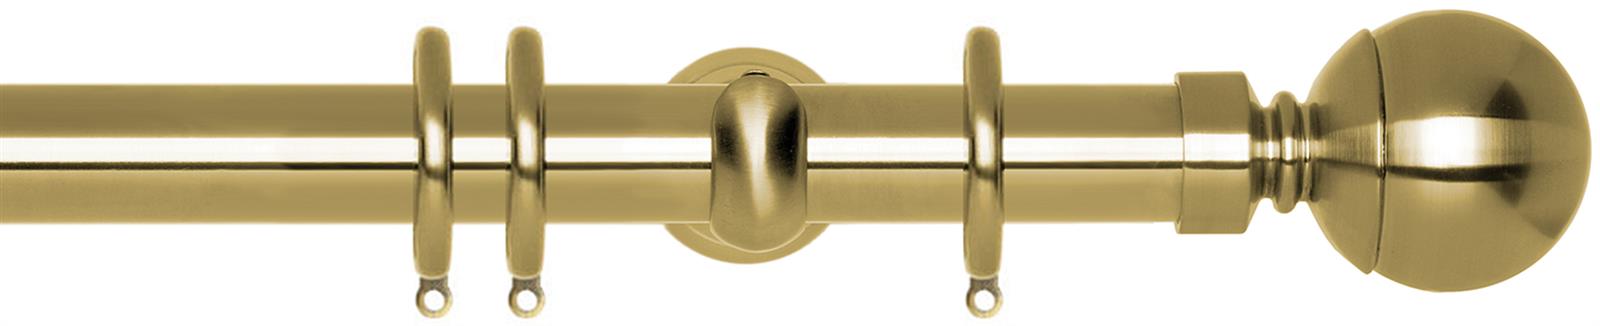 Rolls Neo 28mm by Hallis Hudson Metal Curtain Pole in a Spun Brass effect finish with an adjustable cup bracket and a Ball finial